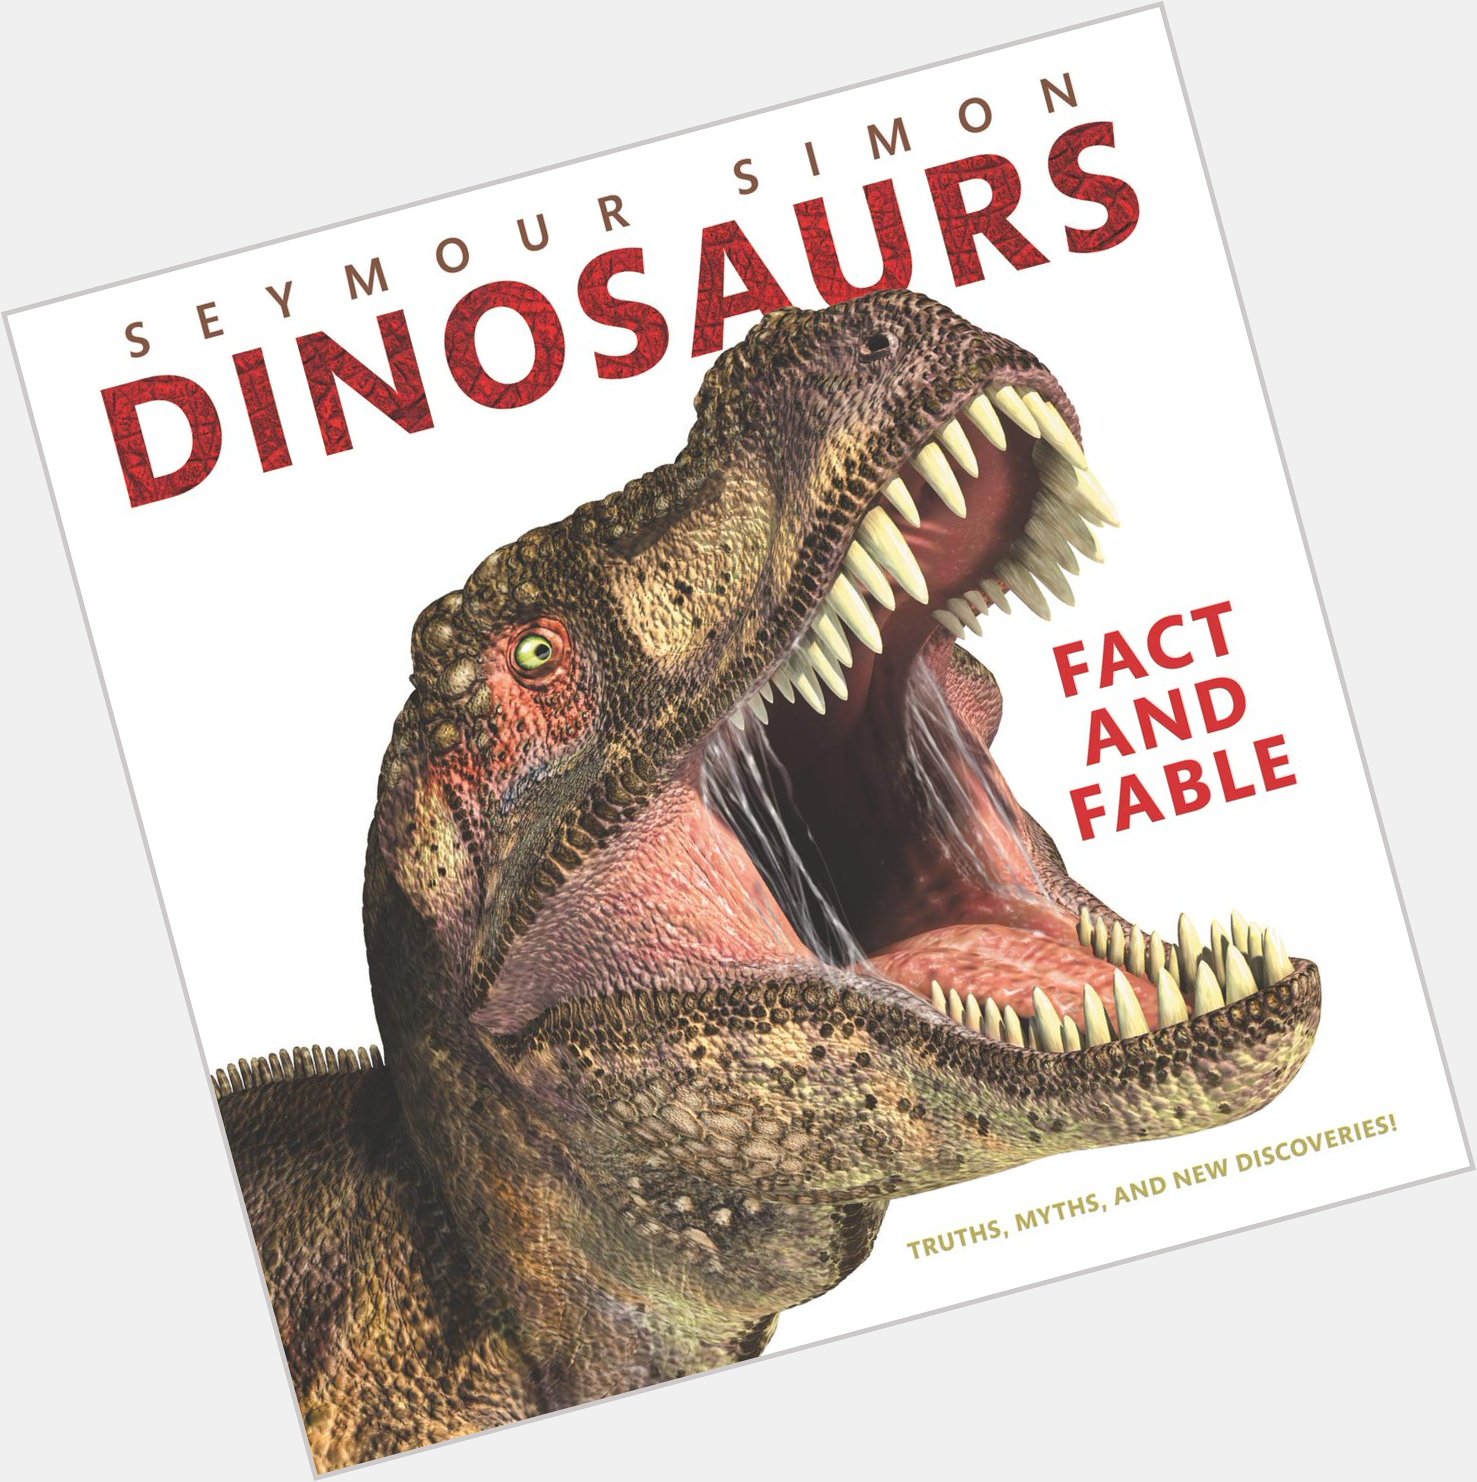 Happy Birthday, Seymour Simon! (August 9)

Pre-order DINOSAURS: FACT AND FABLE.  